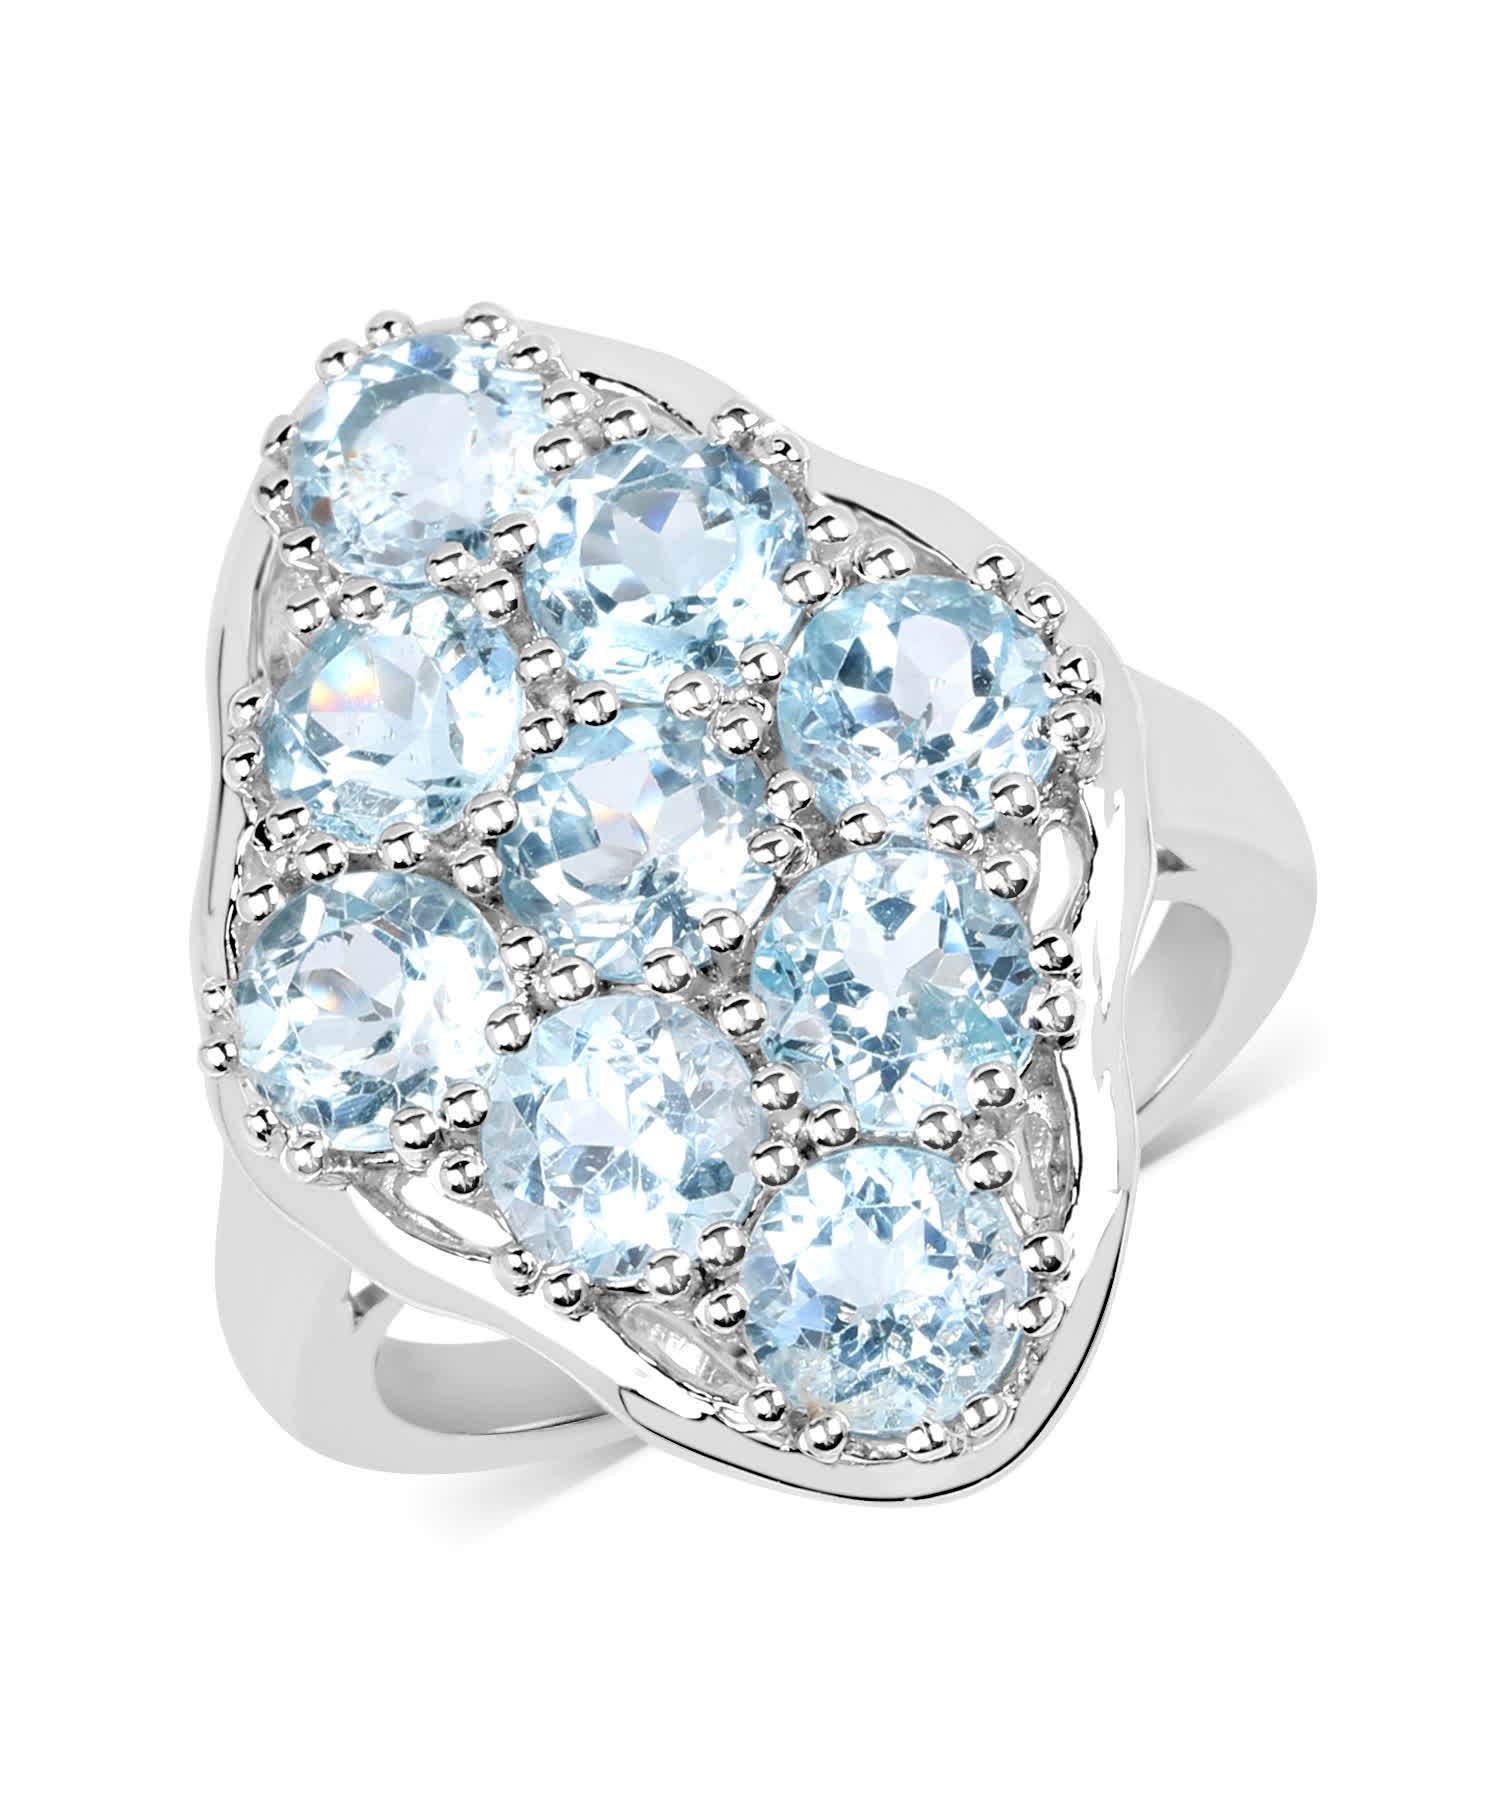 5.40ctw Natural Sky Blue Topaz Rhodium Plated 925 Sterling Silver Right Hand Ring View 1